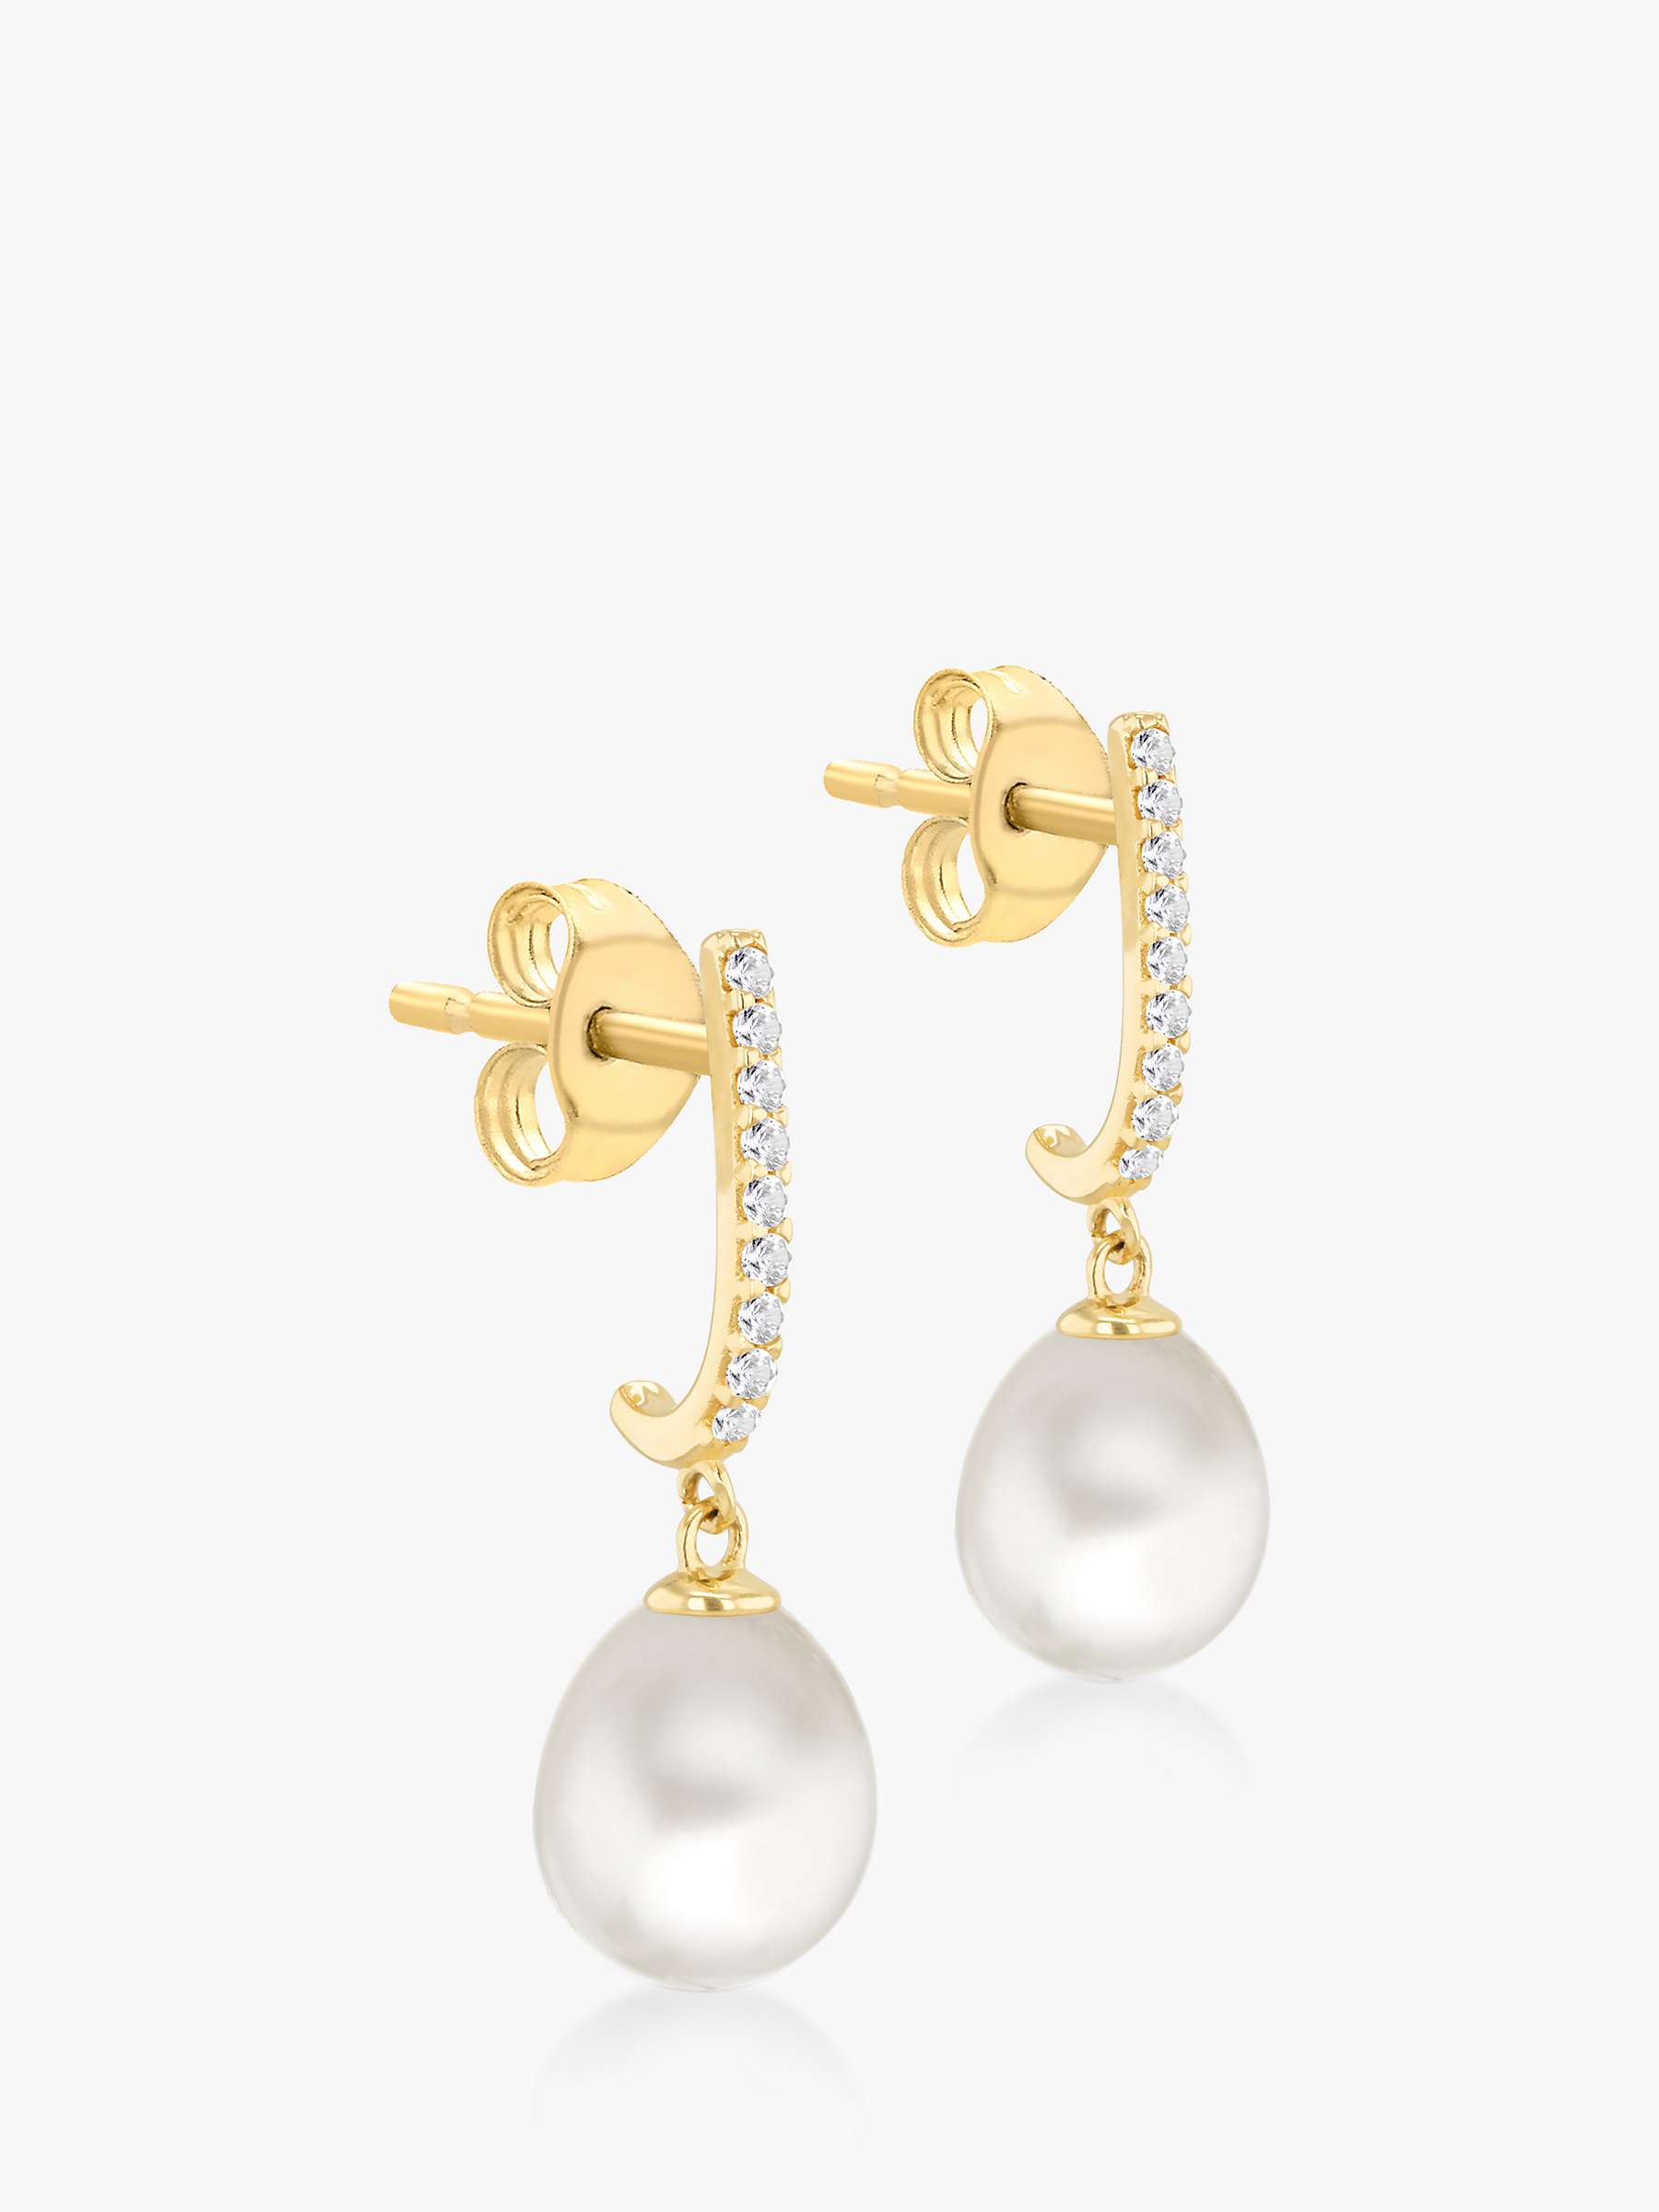 Buy IBB 9ct Gold Pearl & Cubic Zirconia Drop Earrings, Gold Online at johnlewis.com